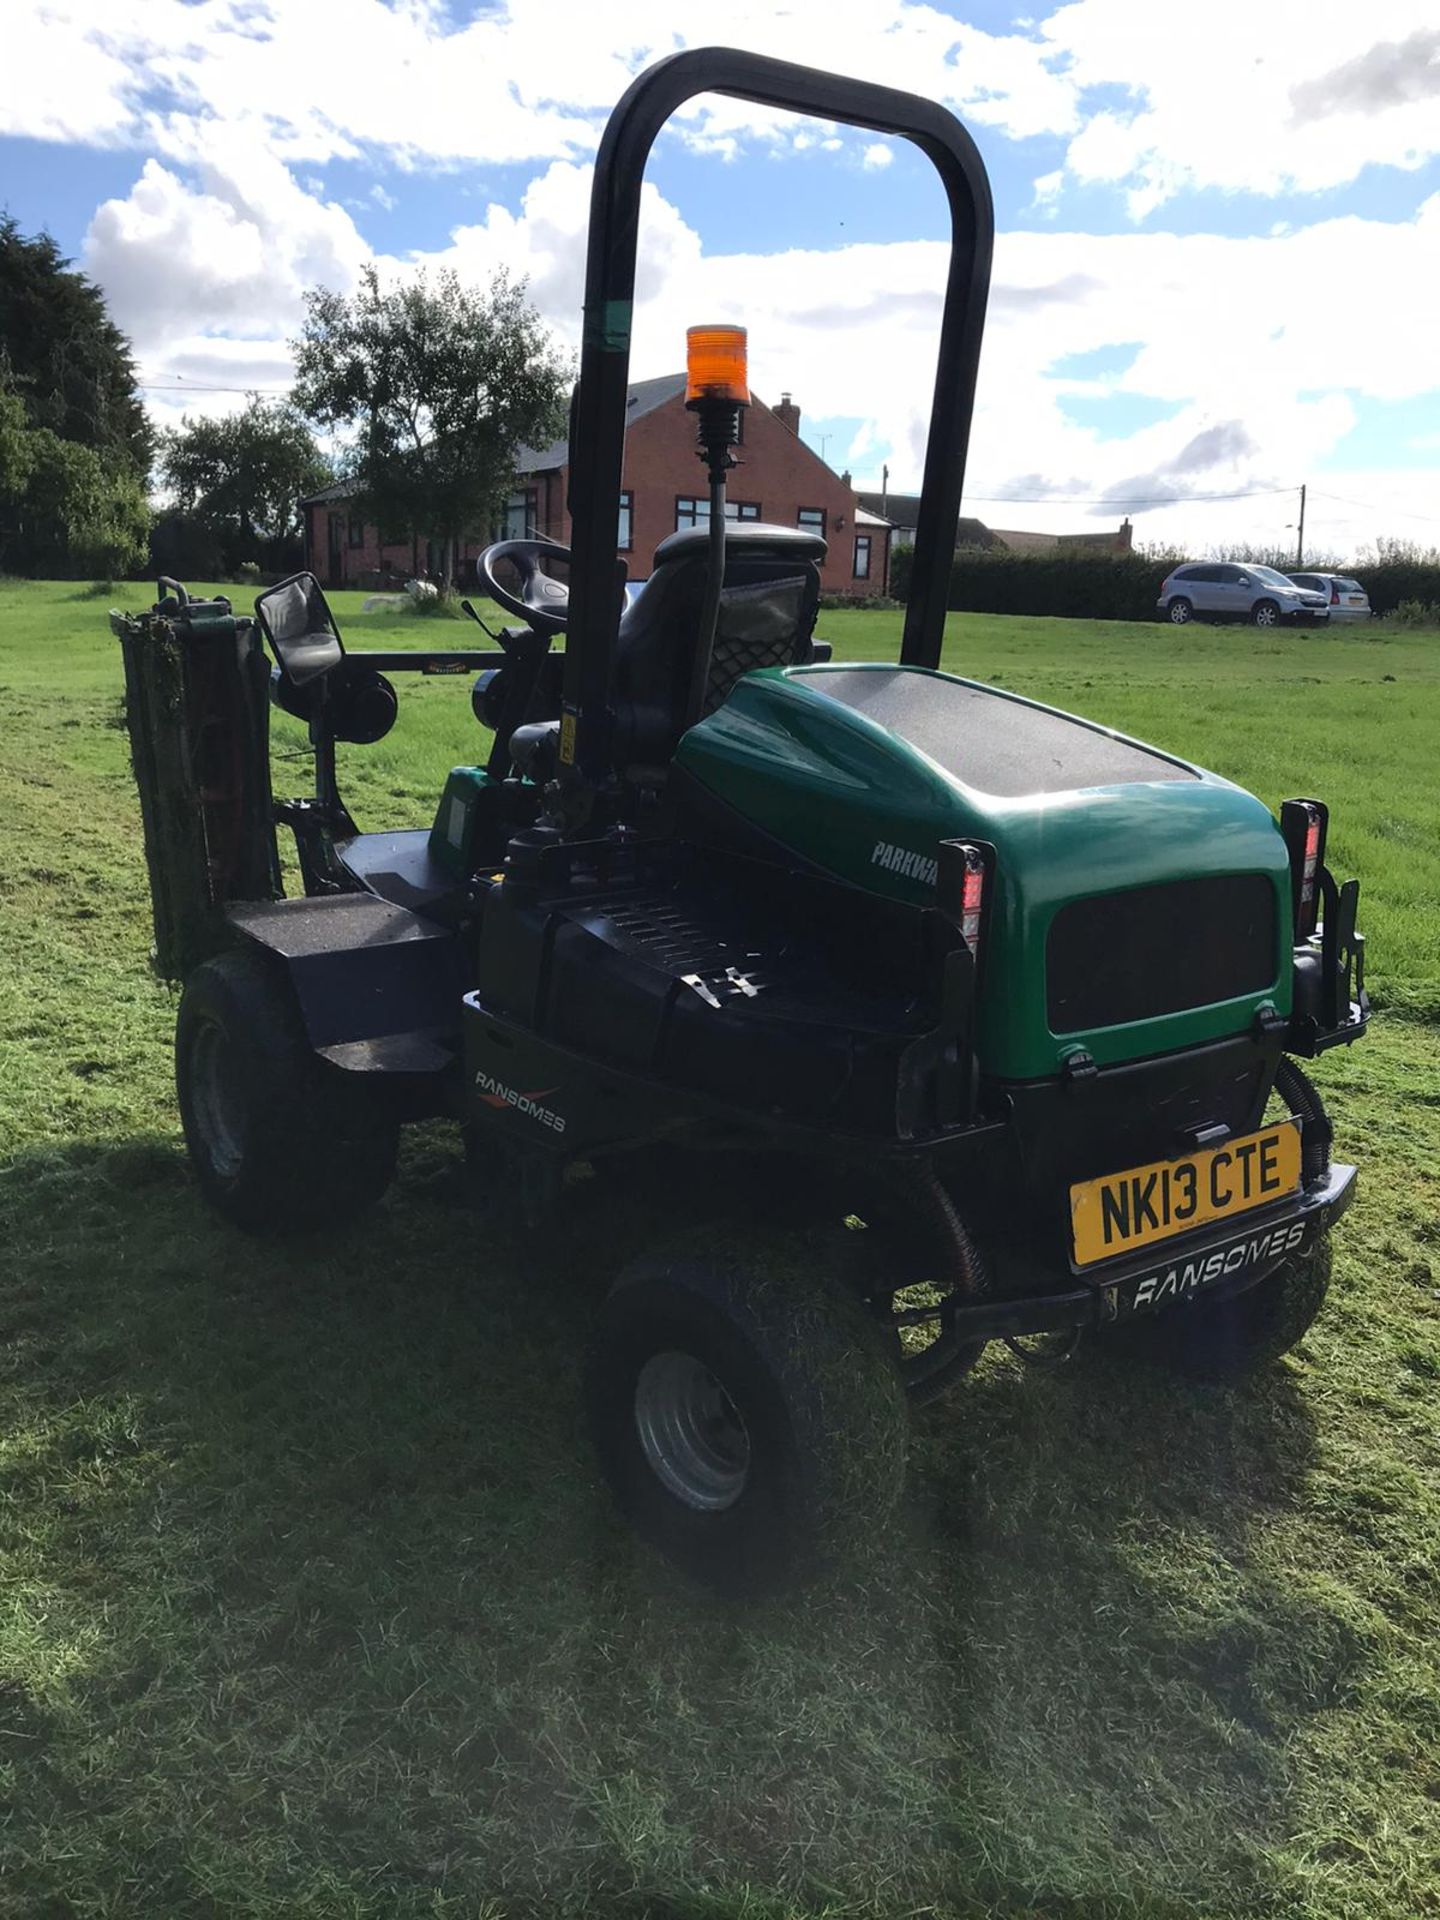 2013 RANSOMES PARKWAY 3 GANG RIDE ON LAWN MOWER WITH ROLL BAR, RUNS, DRIVES AND CUTS *PLUS VAT* - Image 4 of 5